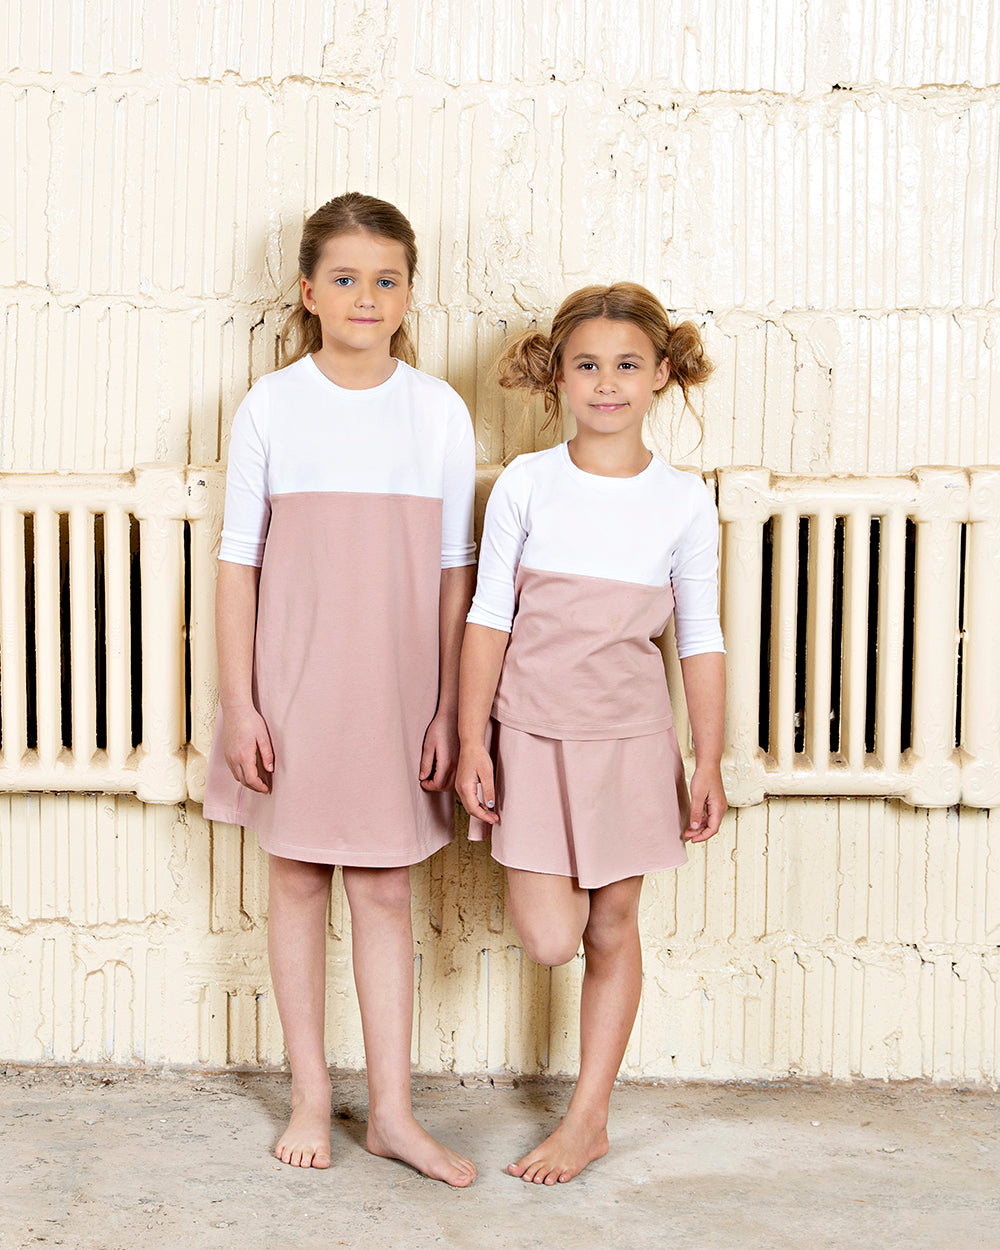 two young girls, one wearing color block pink and white dress, the other wearing color block tee and skirt